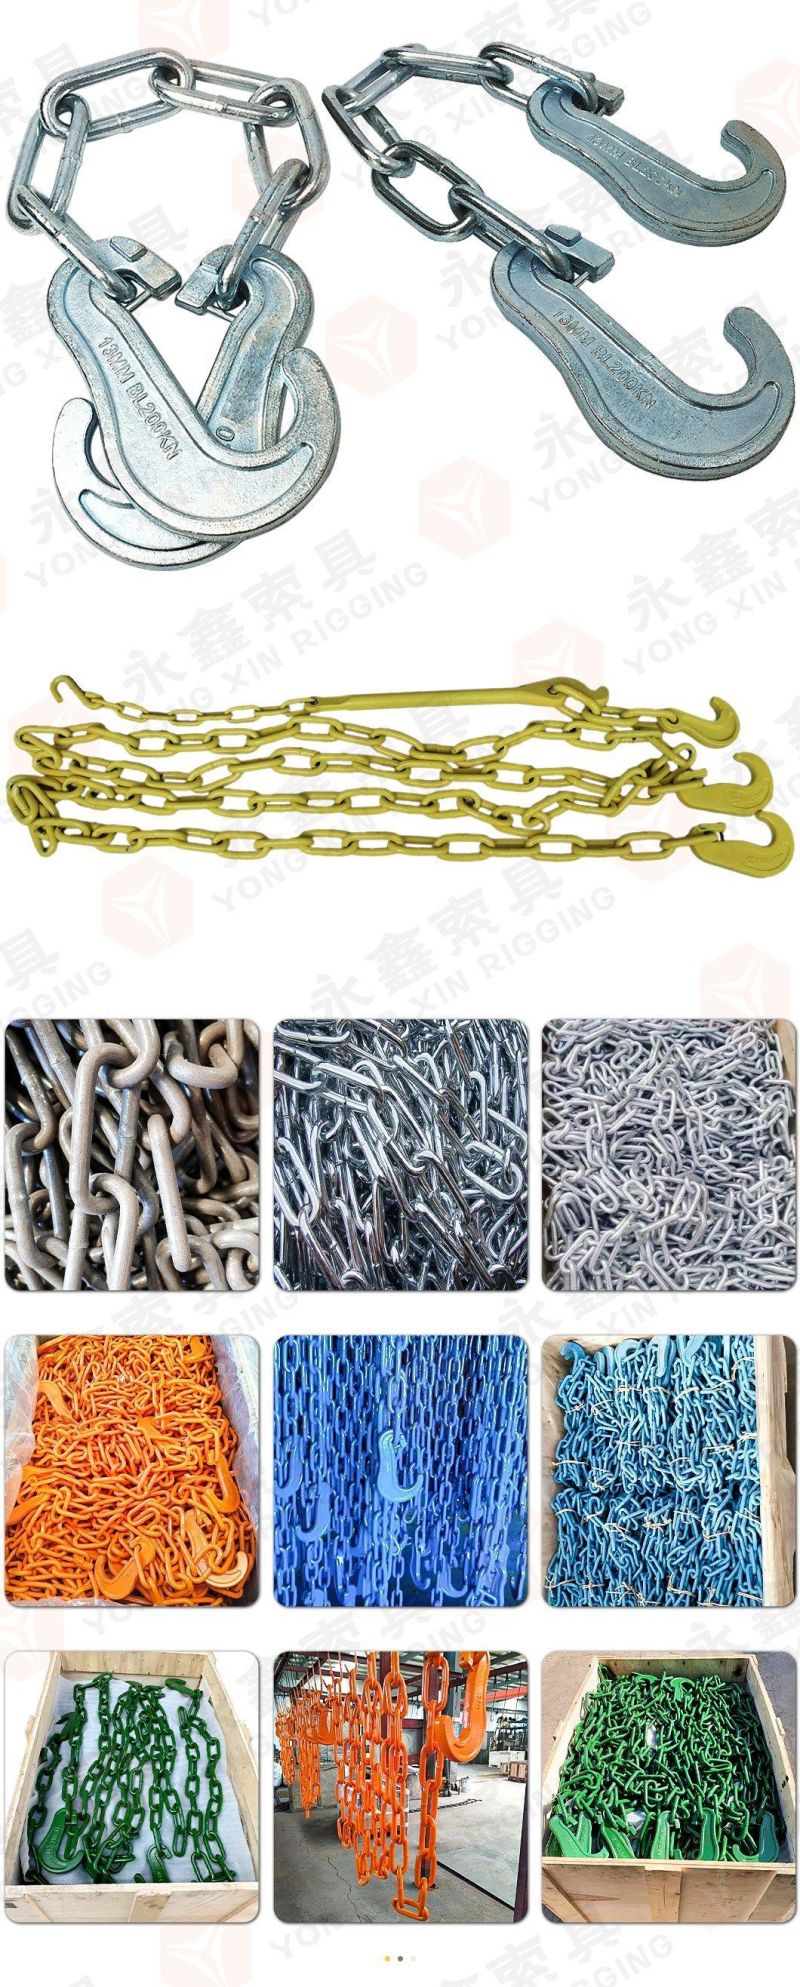 High Strength 13mm Alloy Powder Coating Lashing Chain with J/C Type Hook